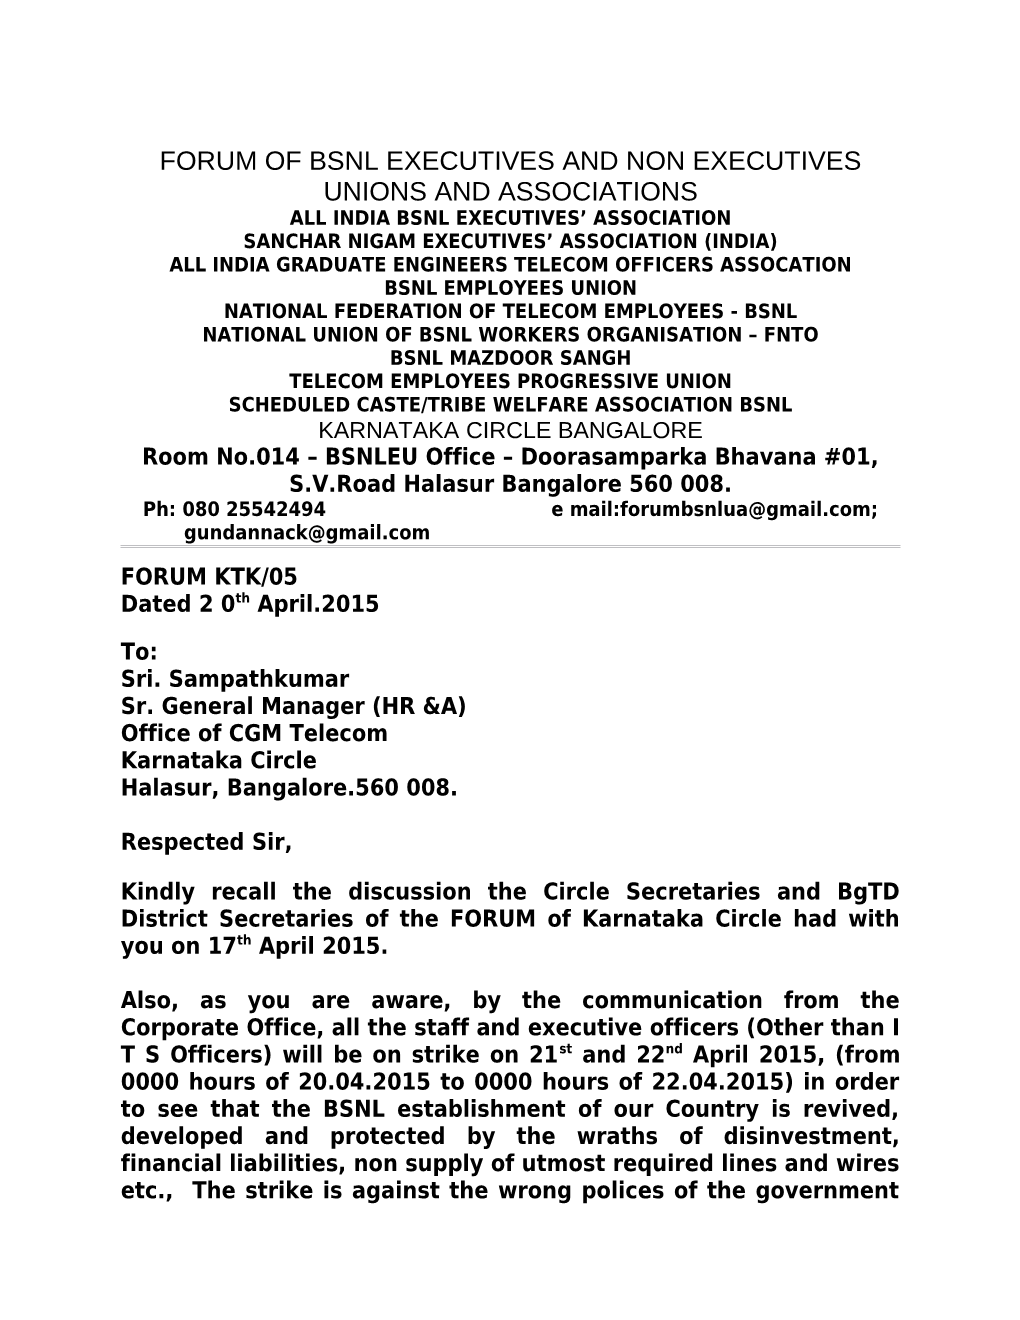 Forum of Bsnl Executives and Non Executives Unions and Associations